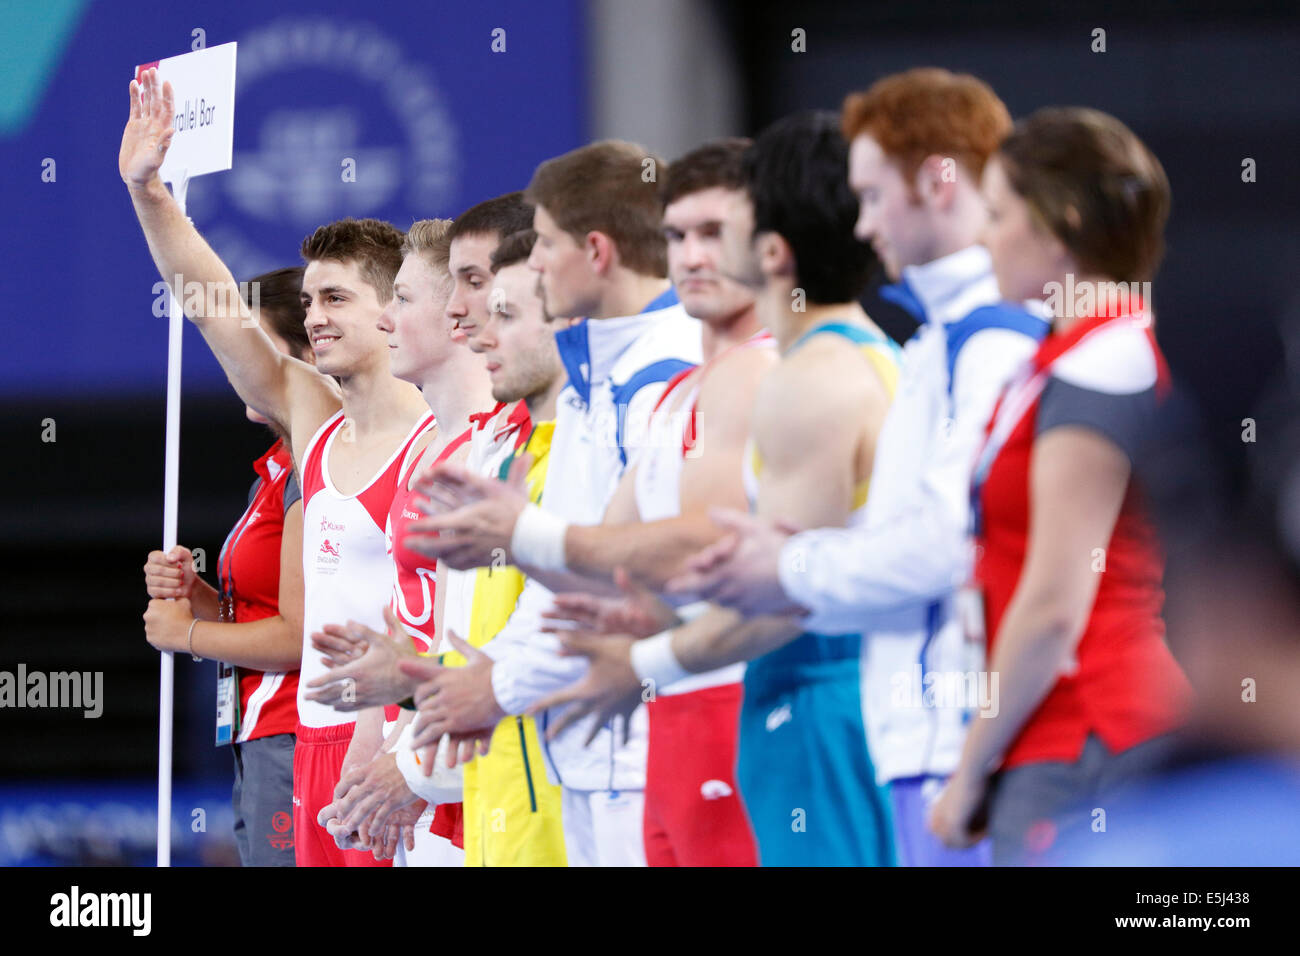 SSE Hydro, Glasgow, Scotland, UK, Friday, 1st August, 2014. Glasgow 2014 Commonwealth Games, Men’s Artistic Gymnastics, Individual Parallel Bars Final. Max Whitlock of England introduced to the spectators at the start of the competition Stock Photo